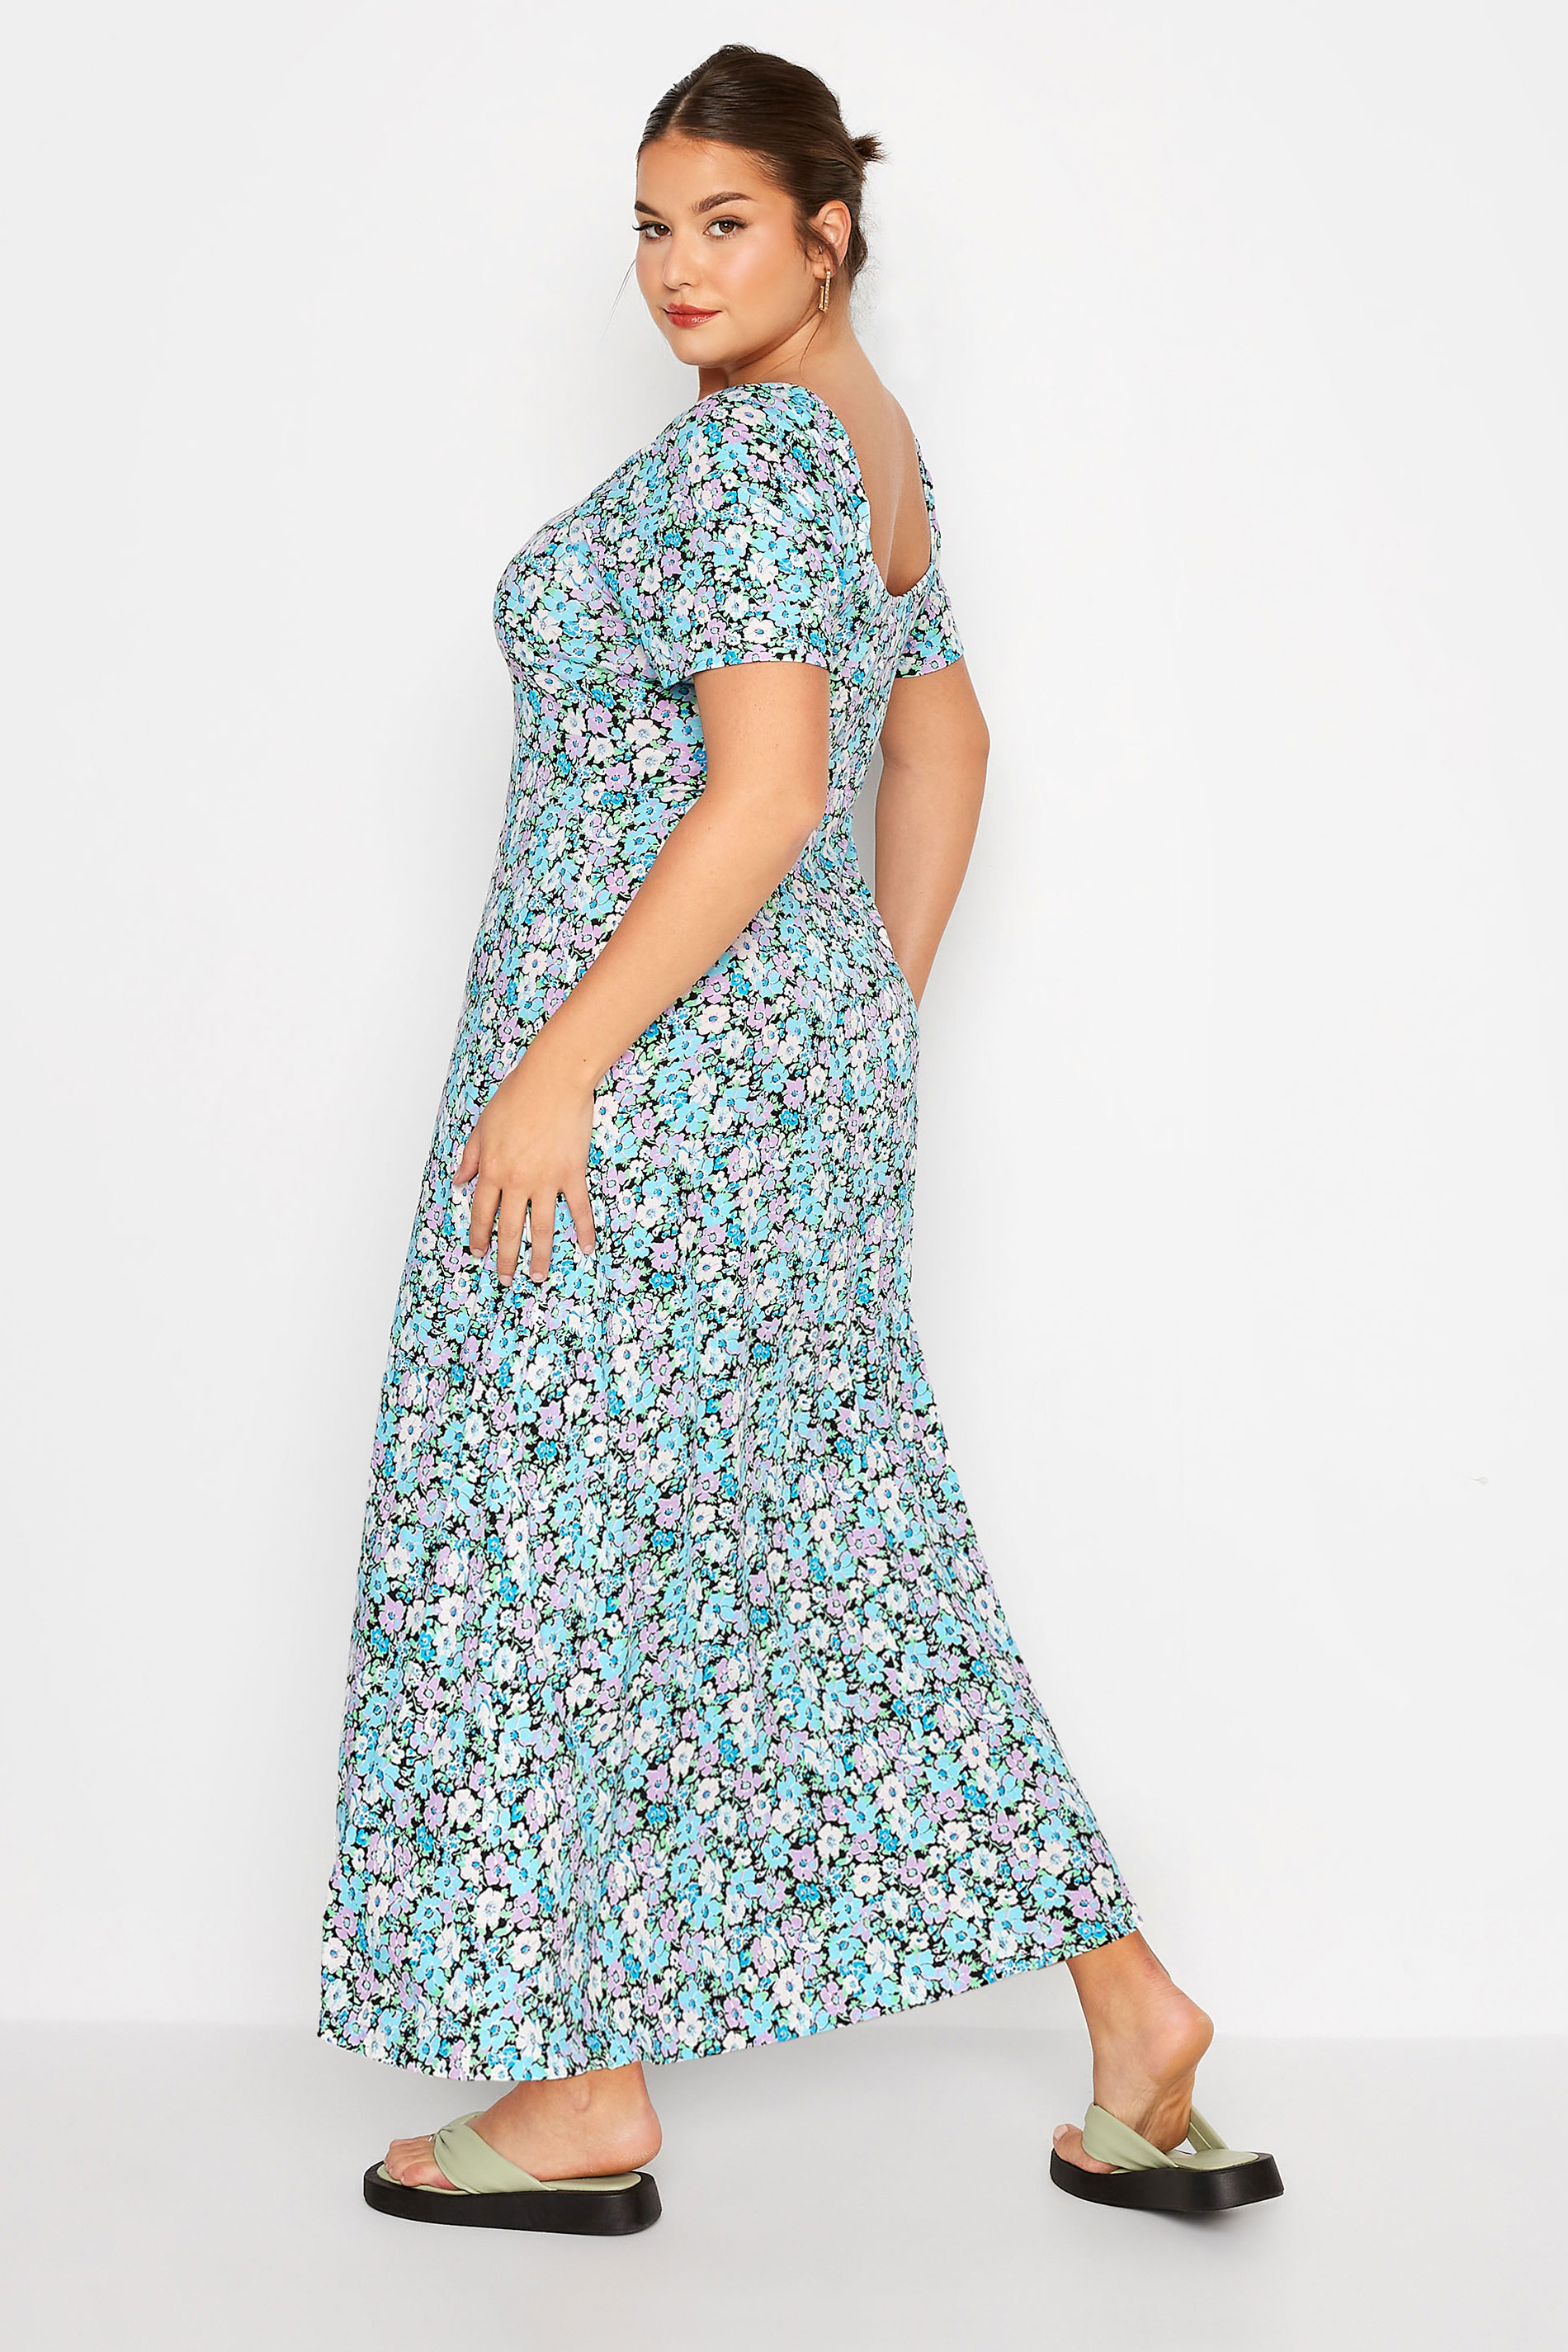 Robes Grande Taille Grande taille  Robes Midaxi | LIMITED COLLECTION - Robe Bleue Floral Manches Courtes - CK51720